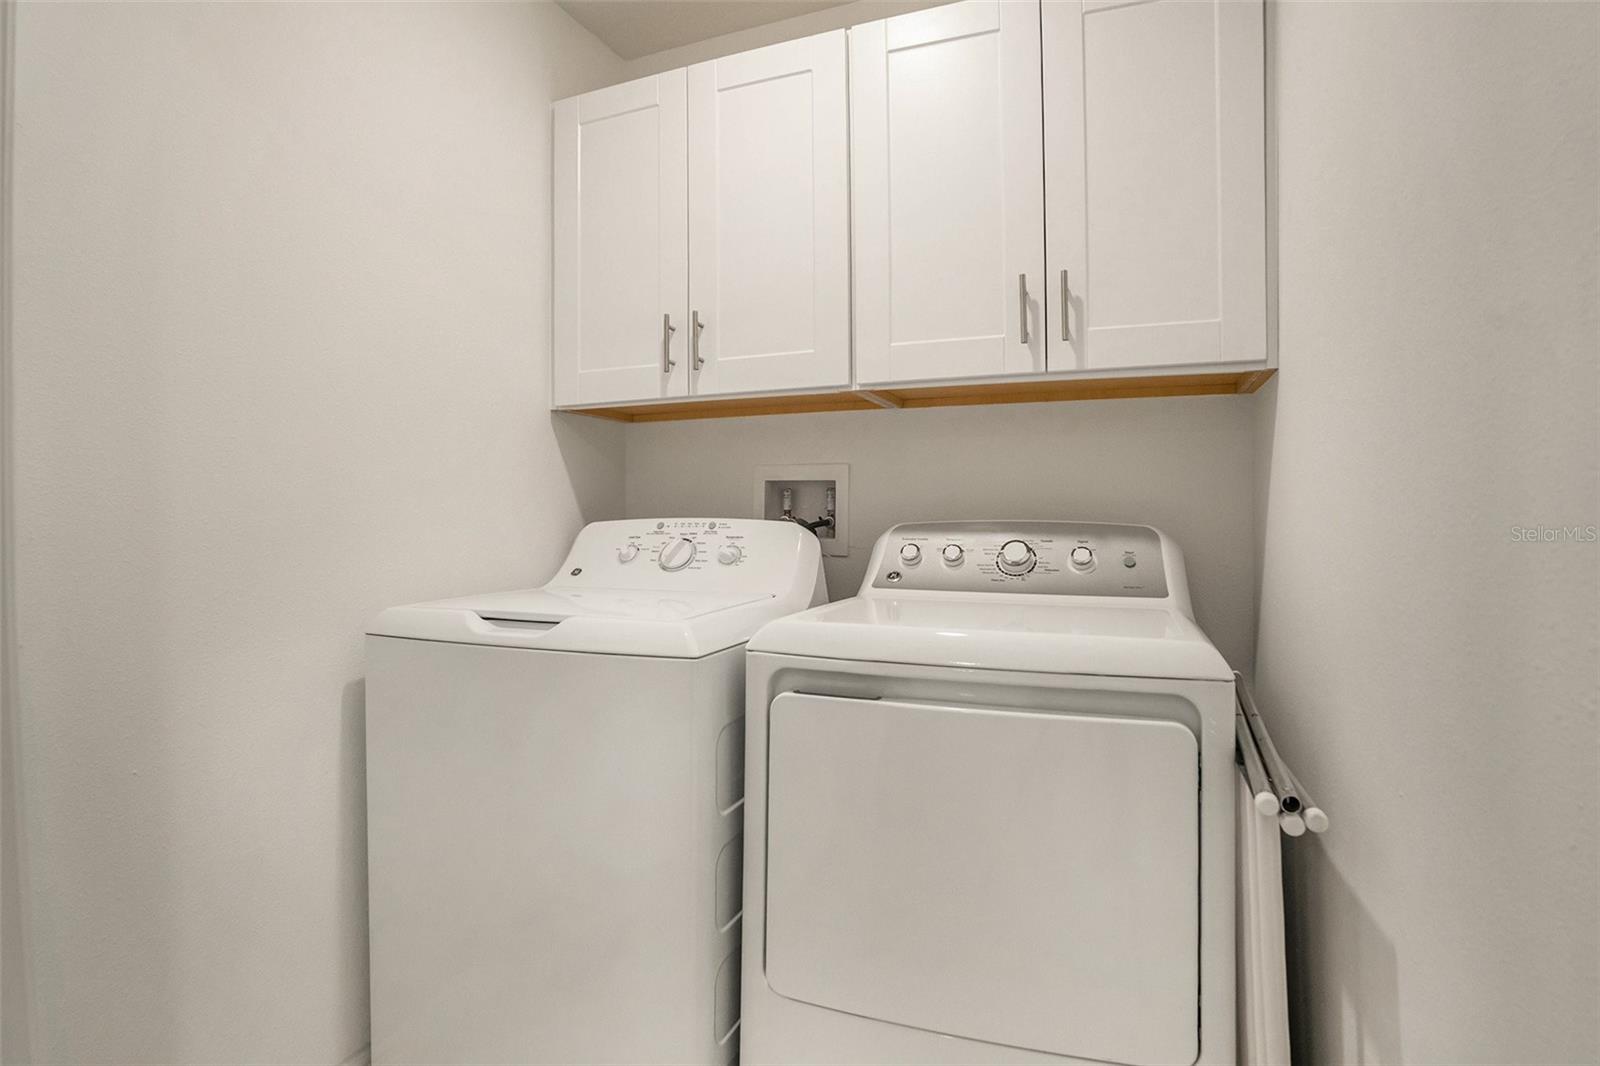 1 year old Washer & Dryer